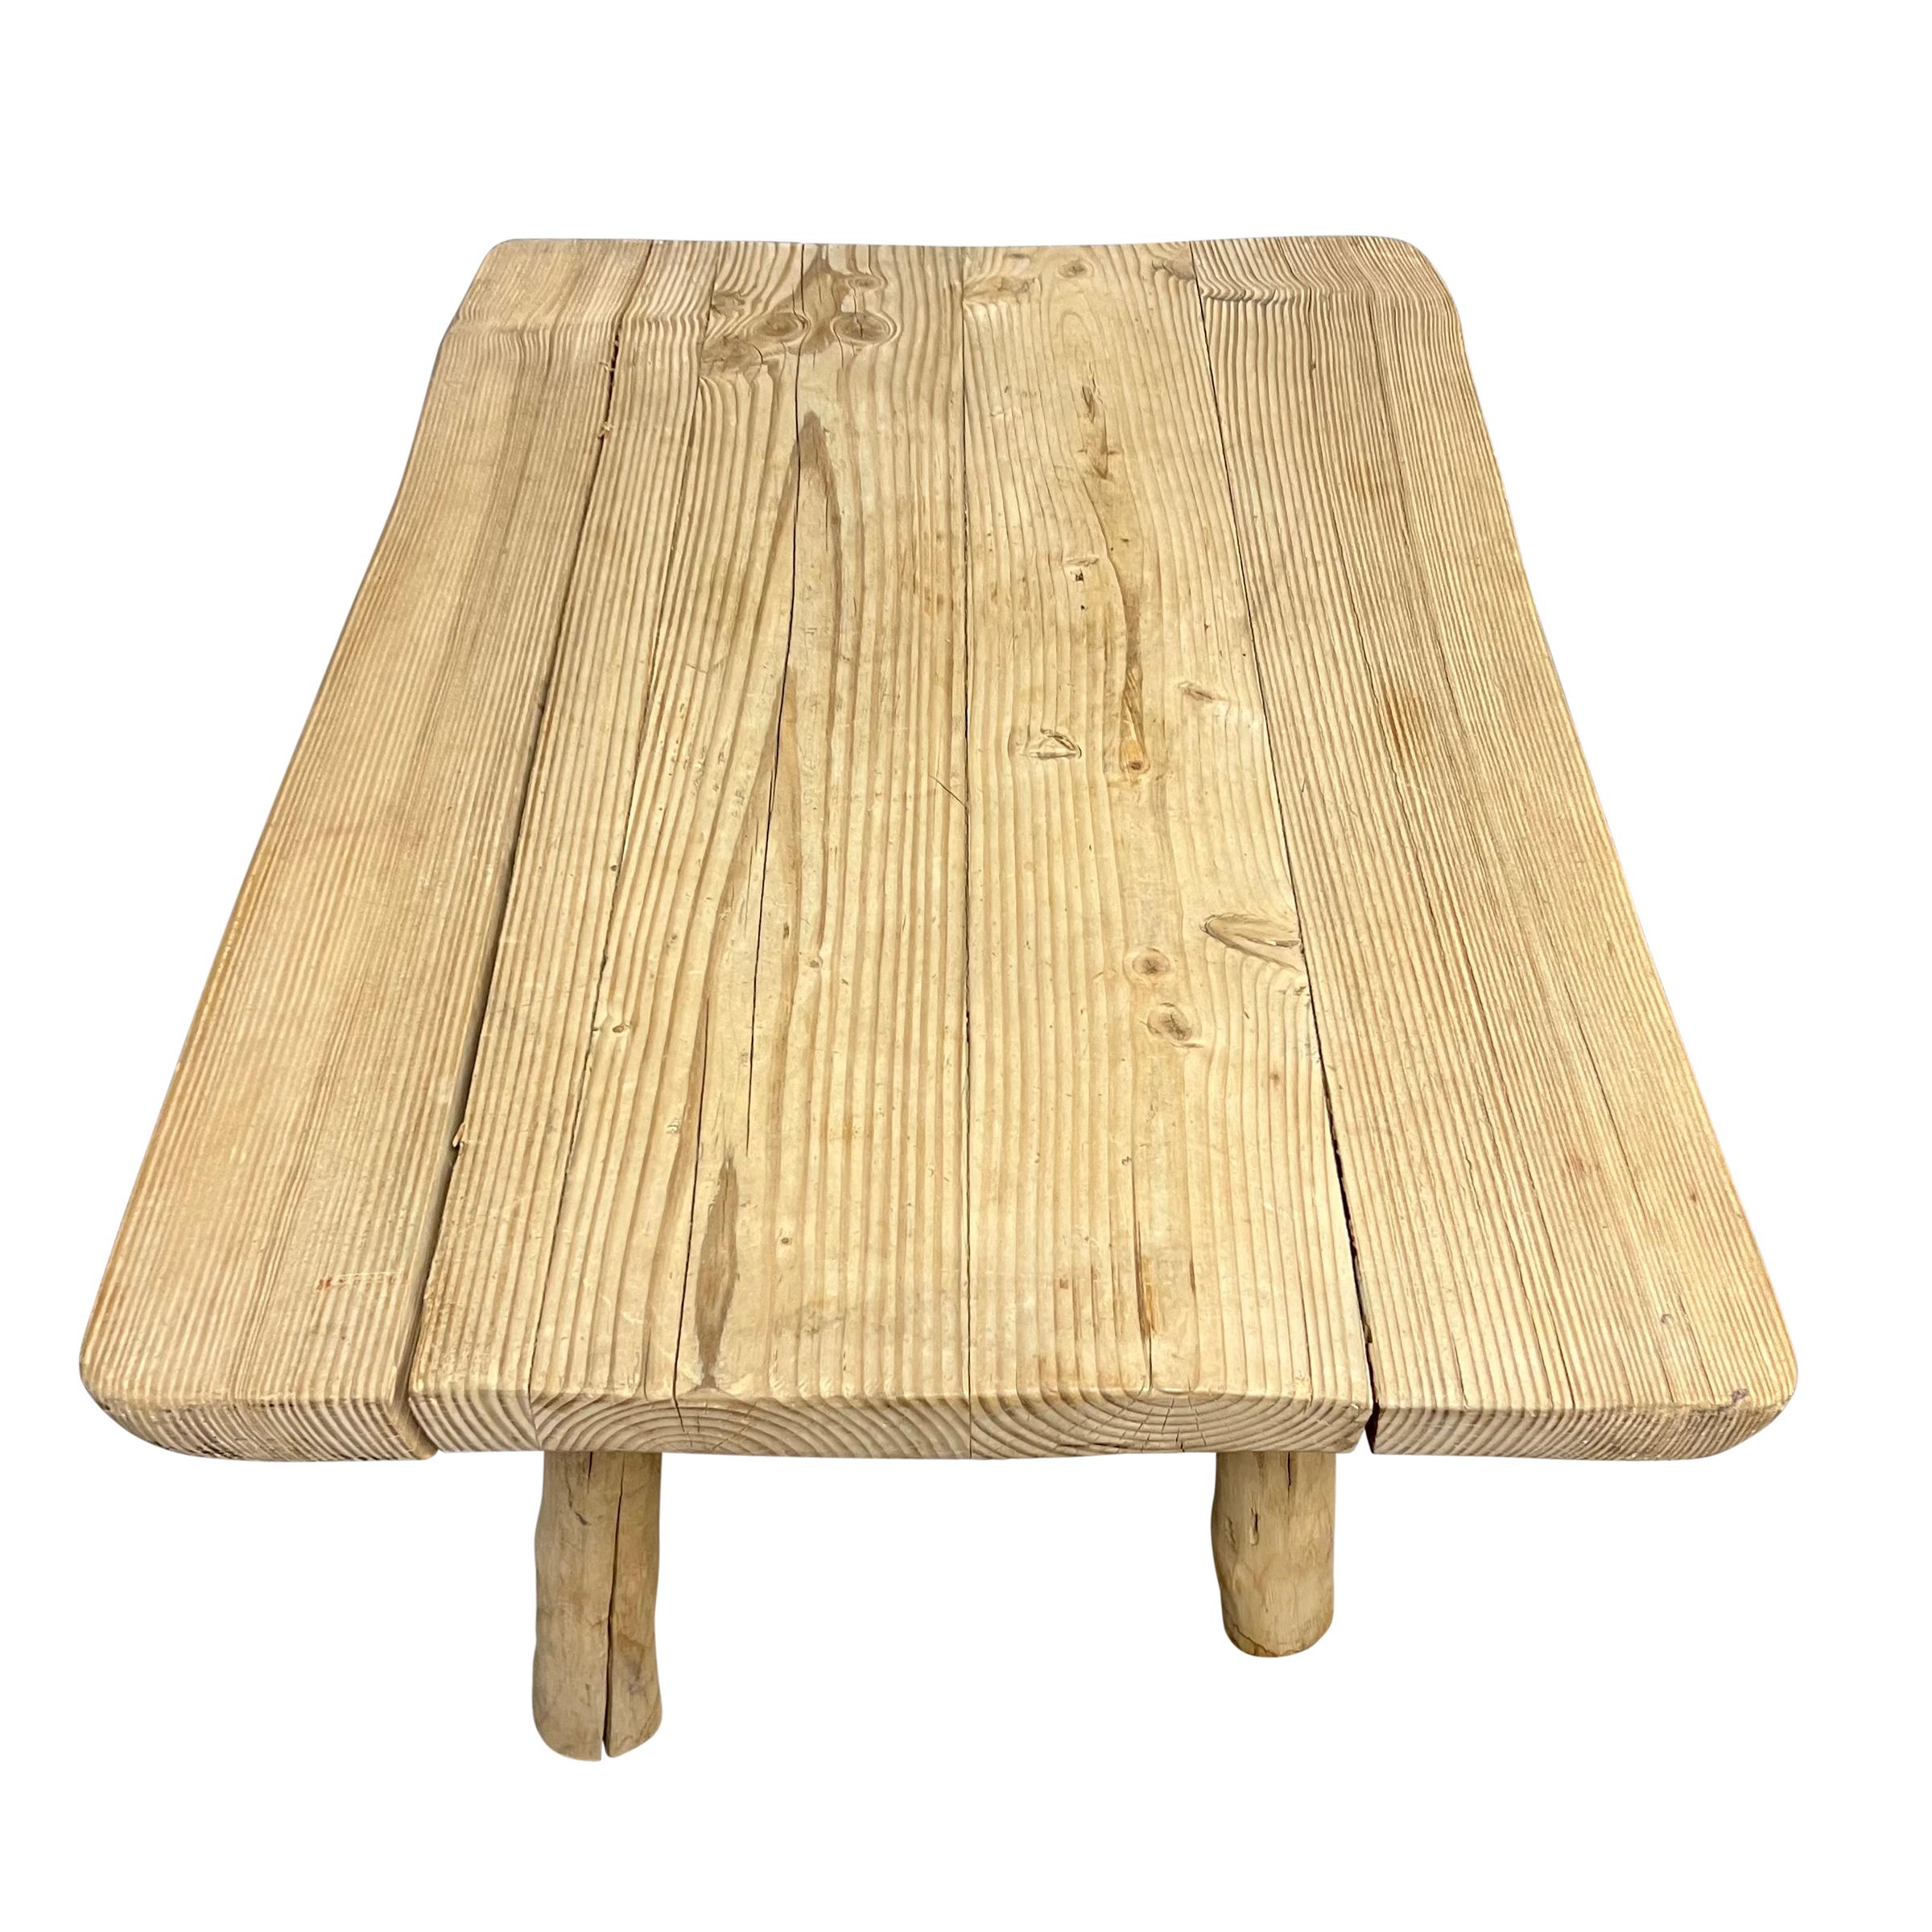 Mid-20th Century French Modernist Pine Low Table For Sale 3